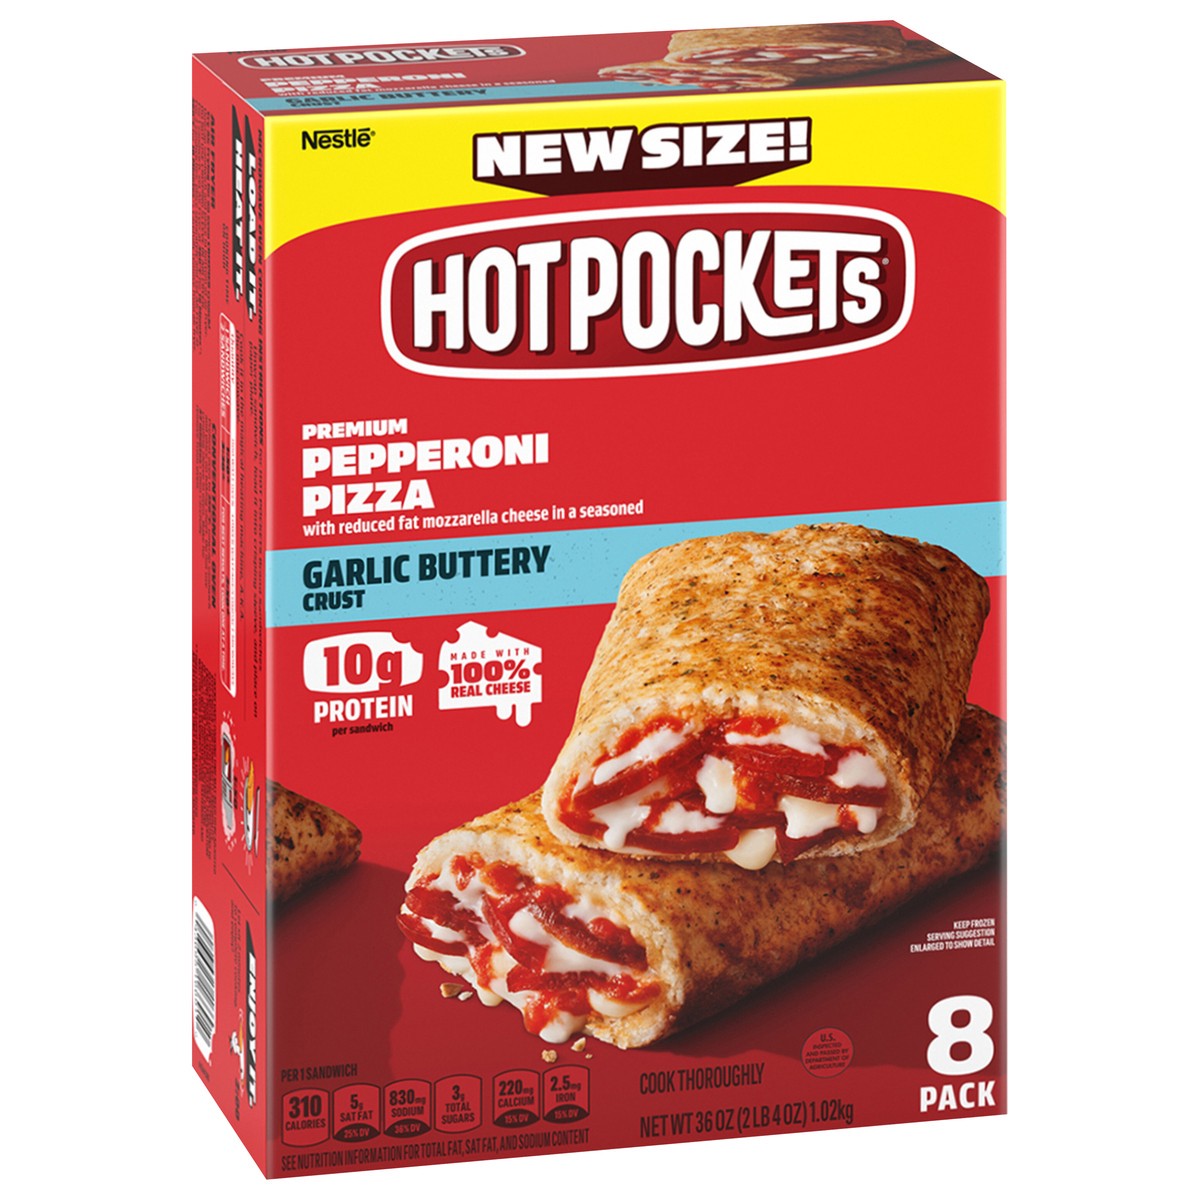 slide 2 of 9, Hot Pockets Pepperoni Pizza Frozen Snacks in a Garlic Buttery Crust, Pizza Snacks Made with Mozzarella Cheese, Frozen Sandwiches, 2.25 lb